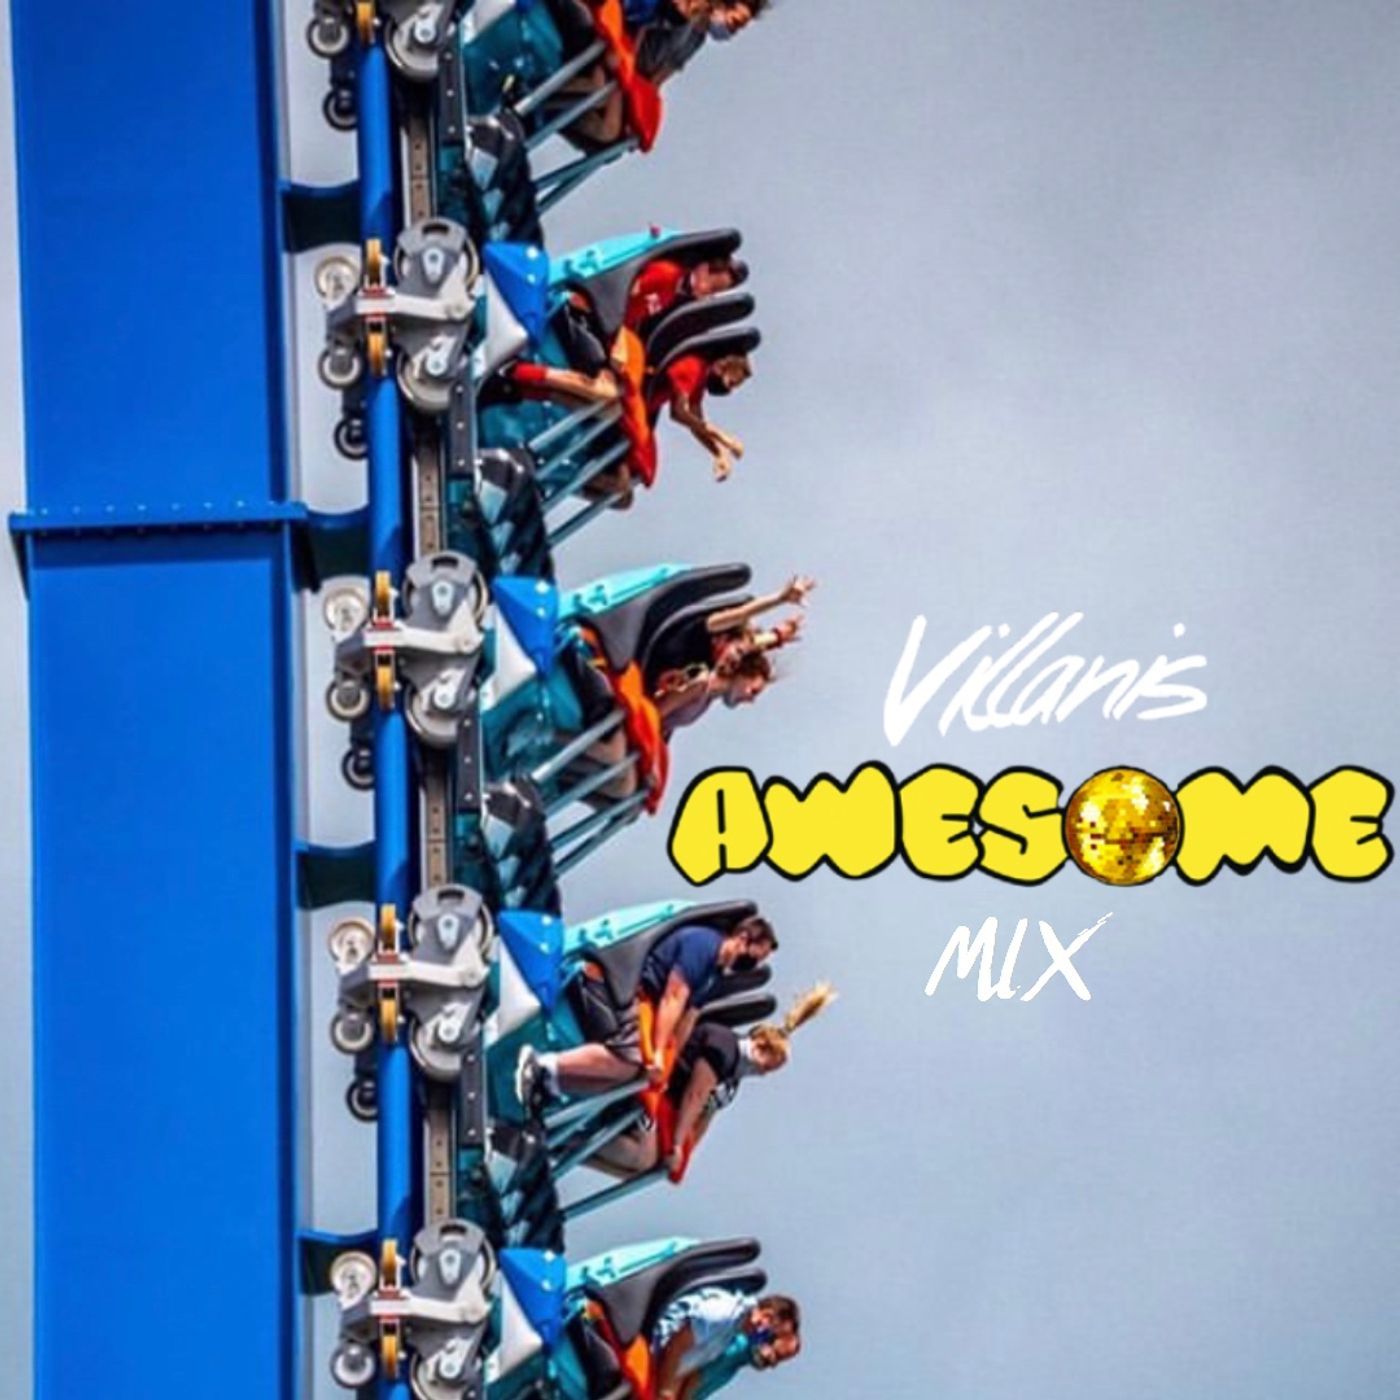 Villanis Awesome Mix 10 - Music for Rollercoasters